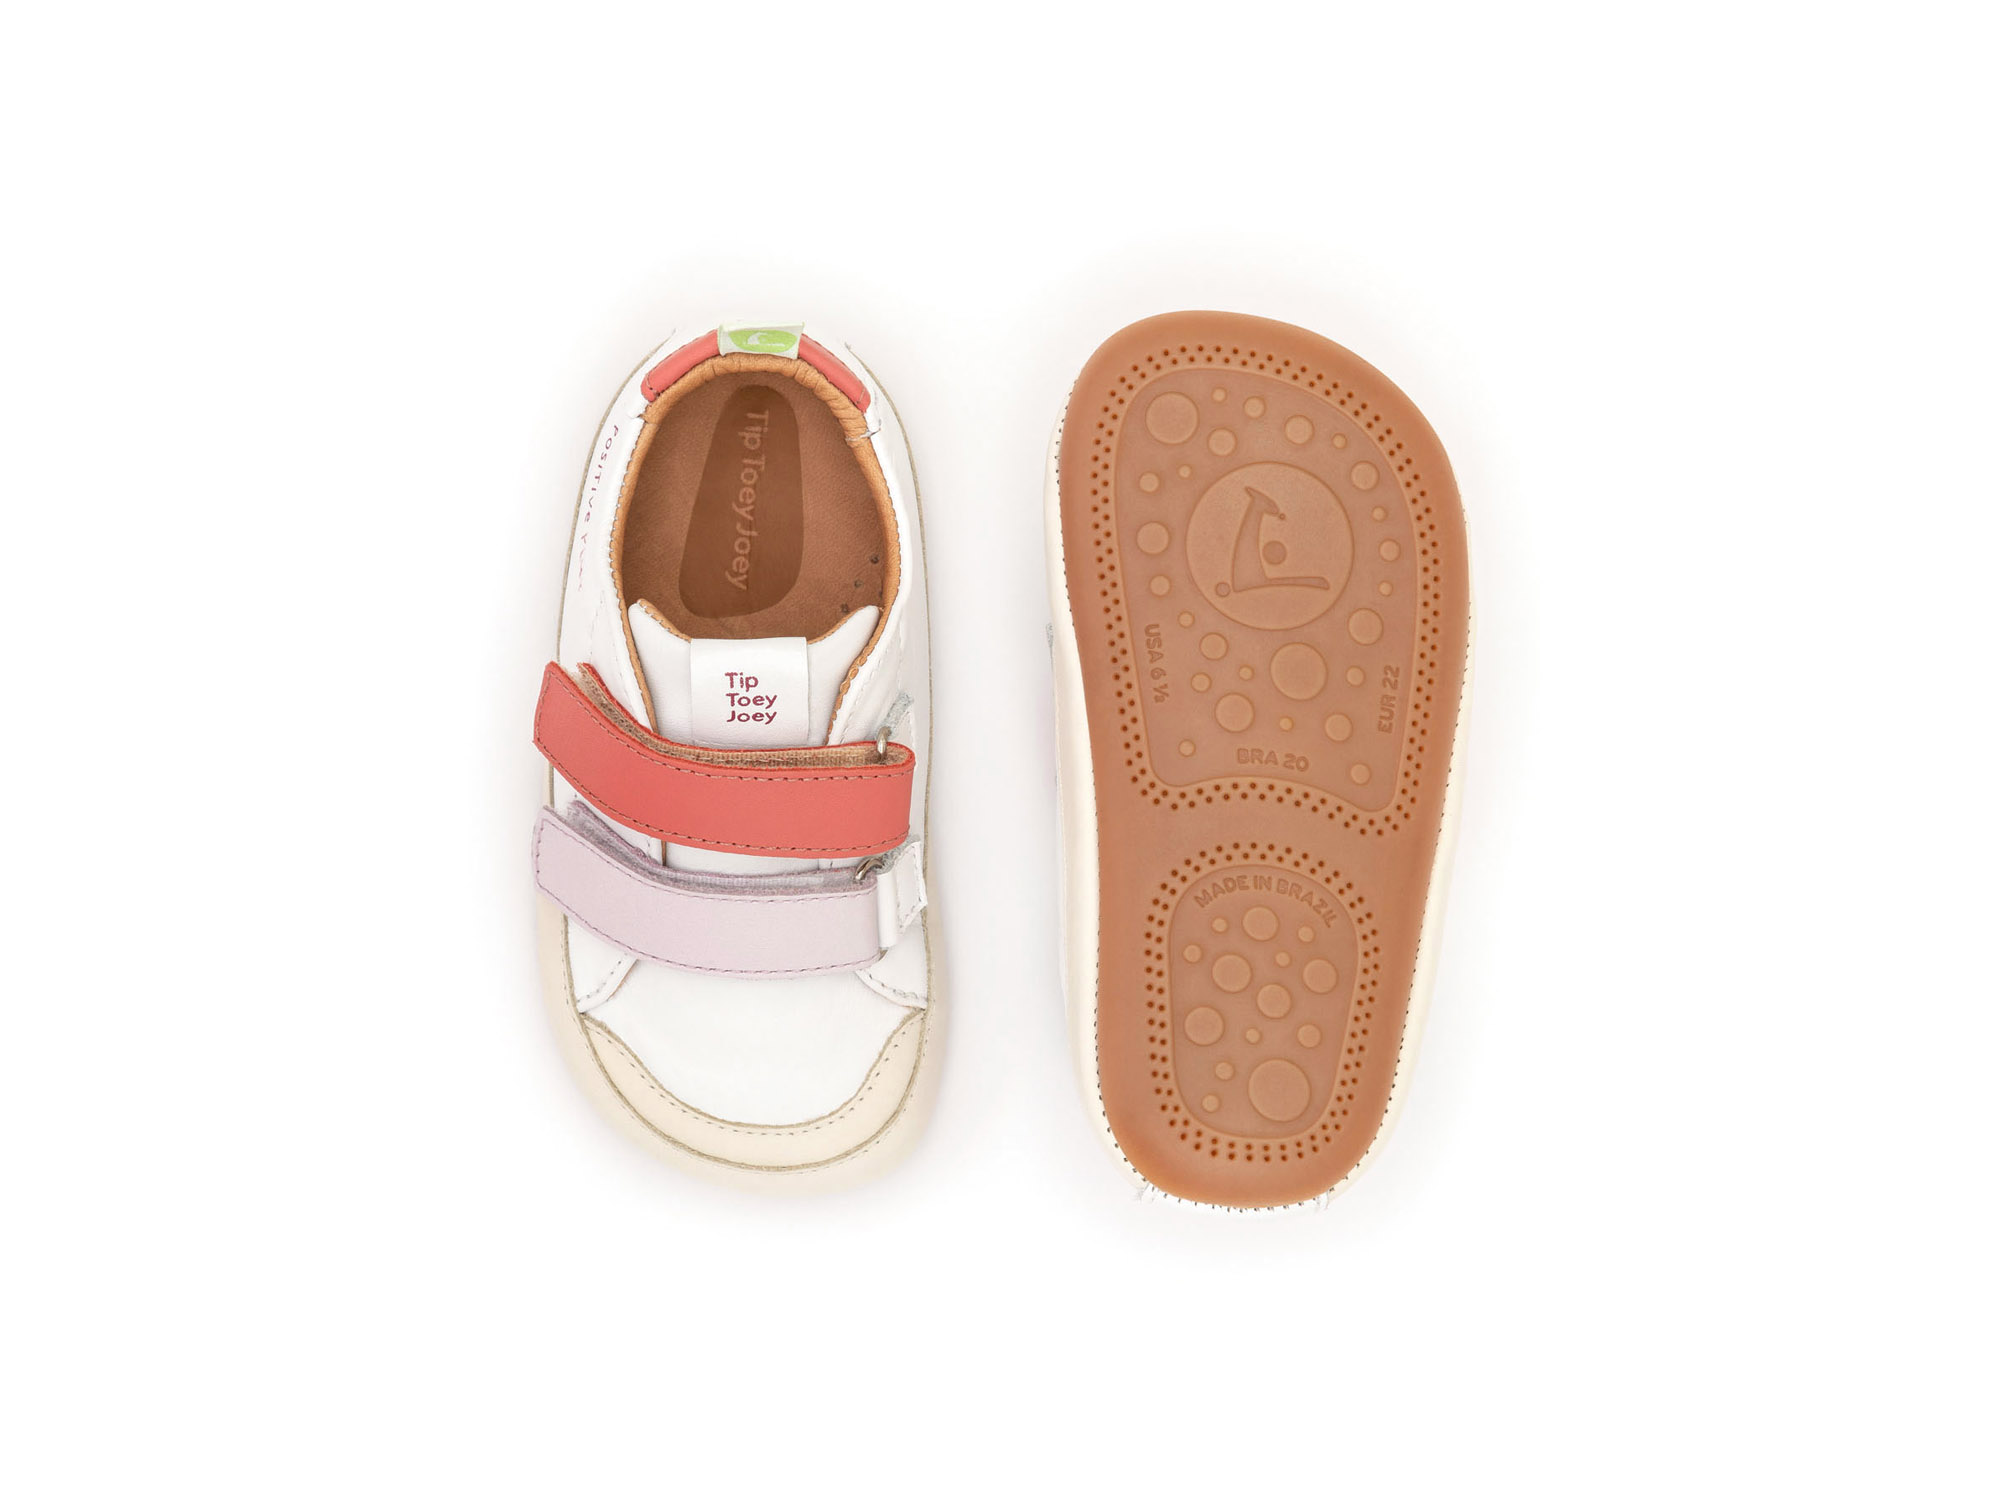 UP & GO Sneakers for Girls Bossy Play | Tip Toey Joey - Australia - 2